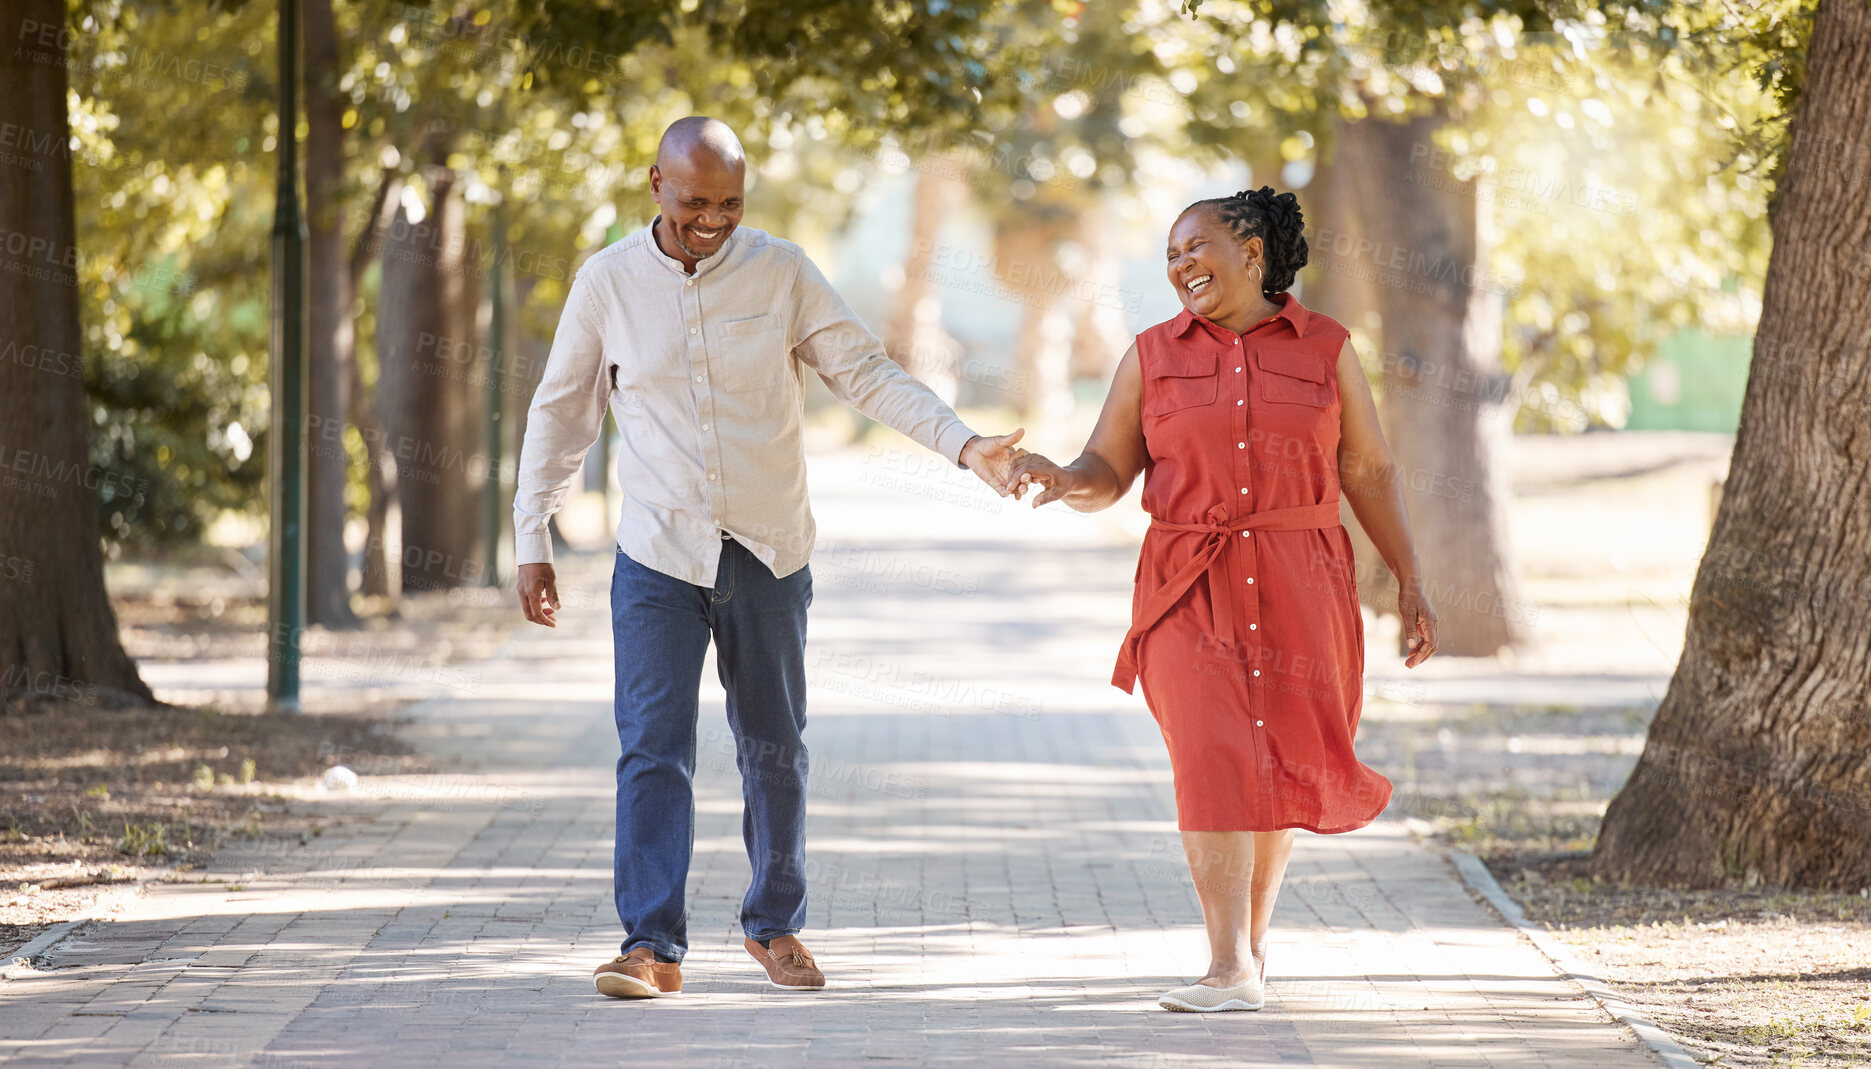 Buy stock photo Walking, holding hands or mature black couple in park for support or trust in marriage commitment. Senior man loves bonding, smiling or relaxing with a happy woman on anniversary date in South Africa